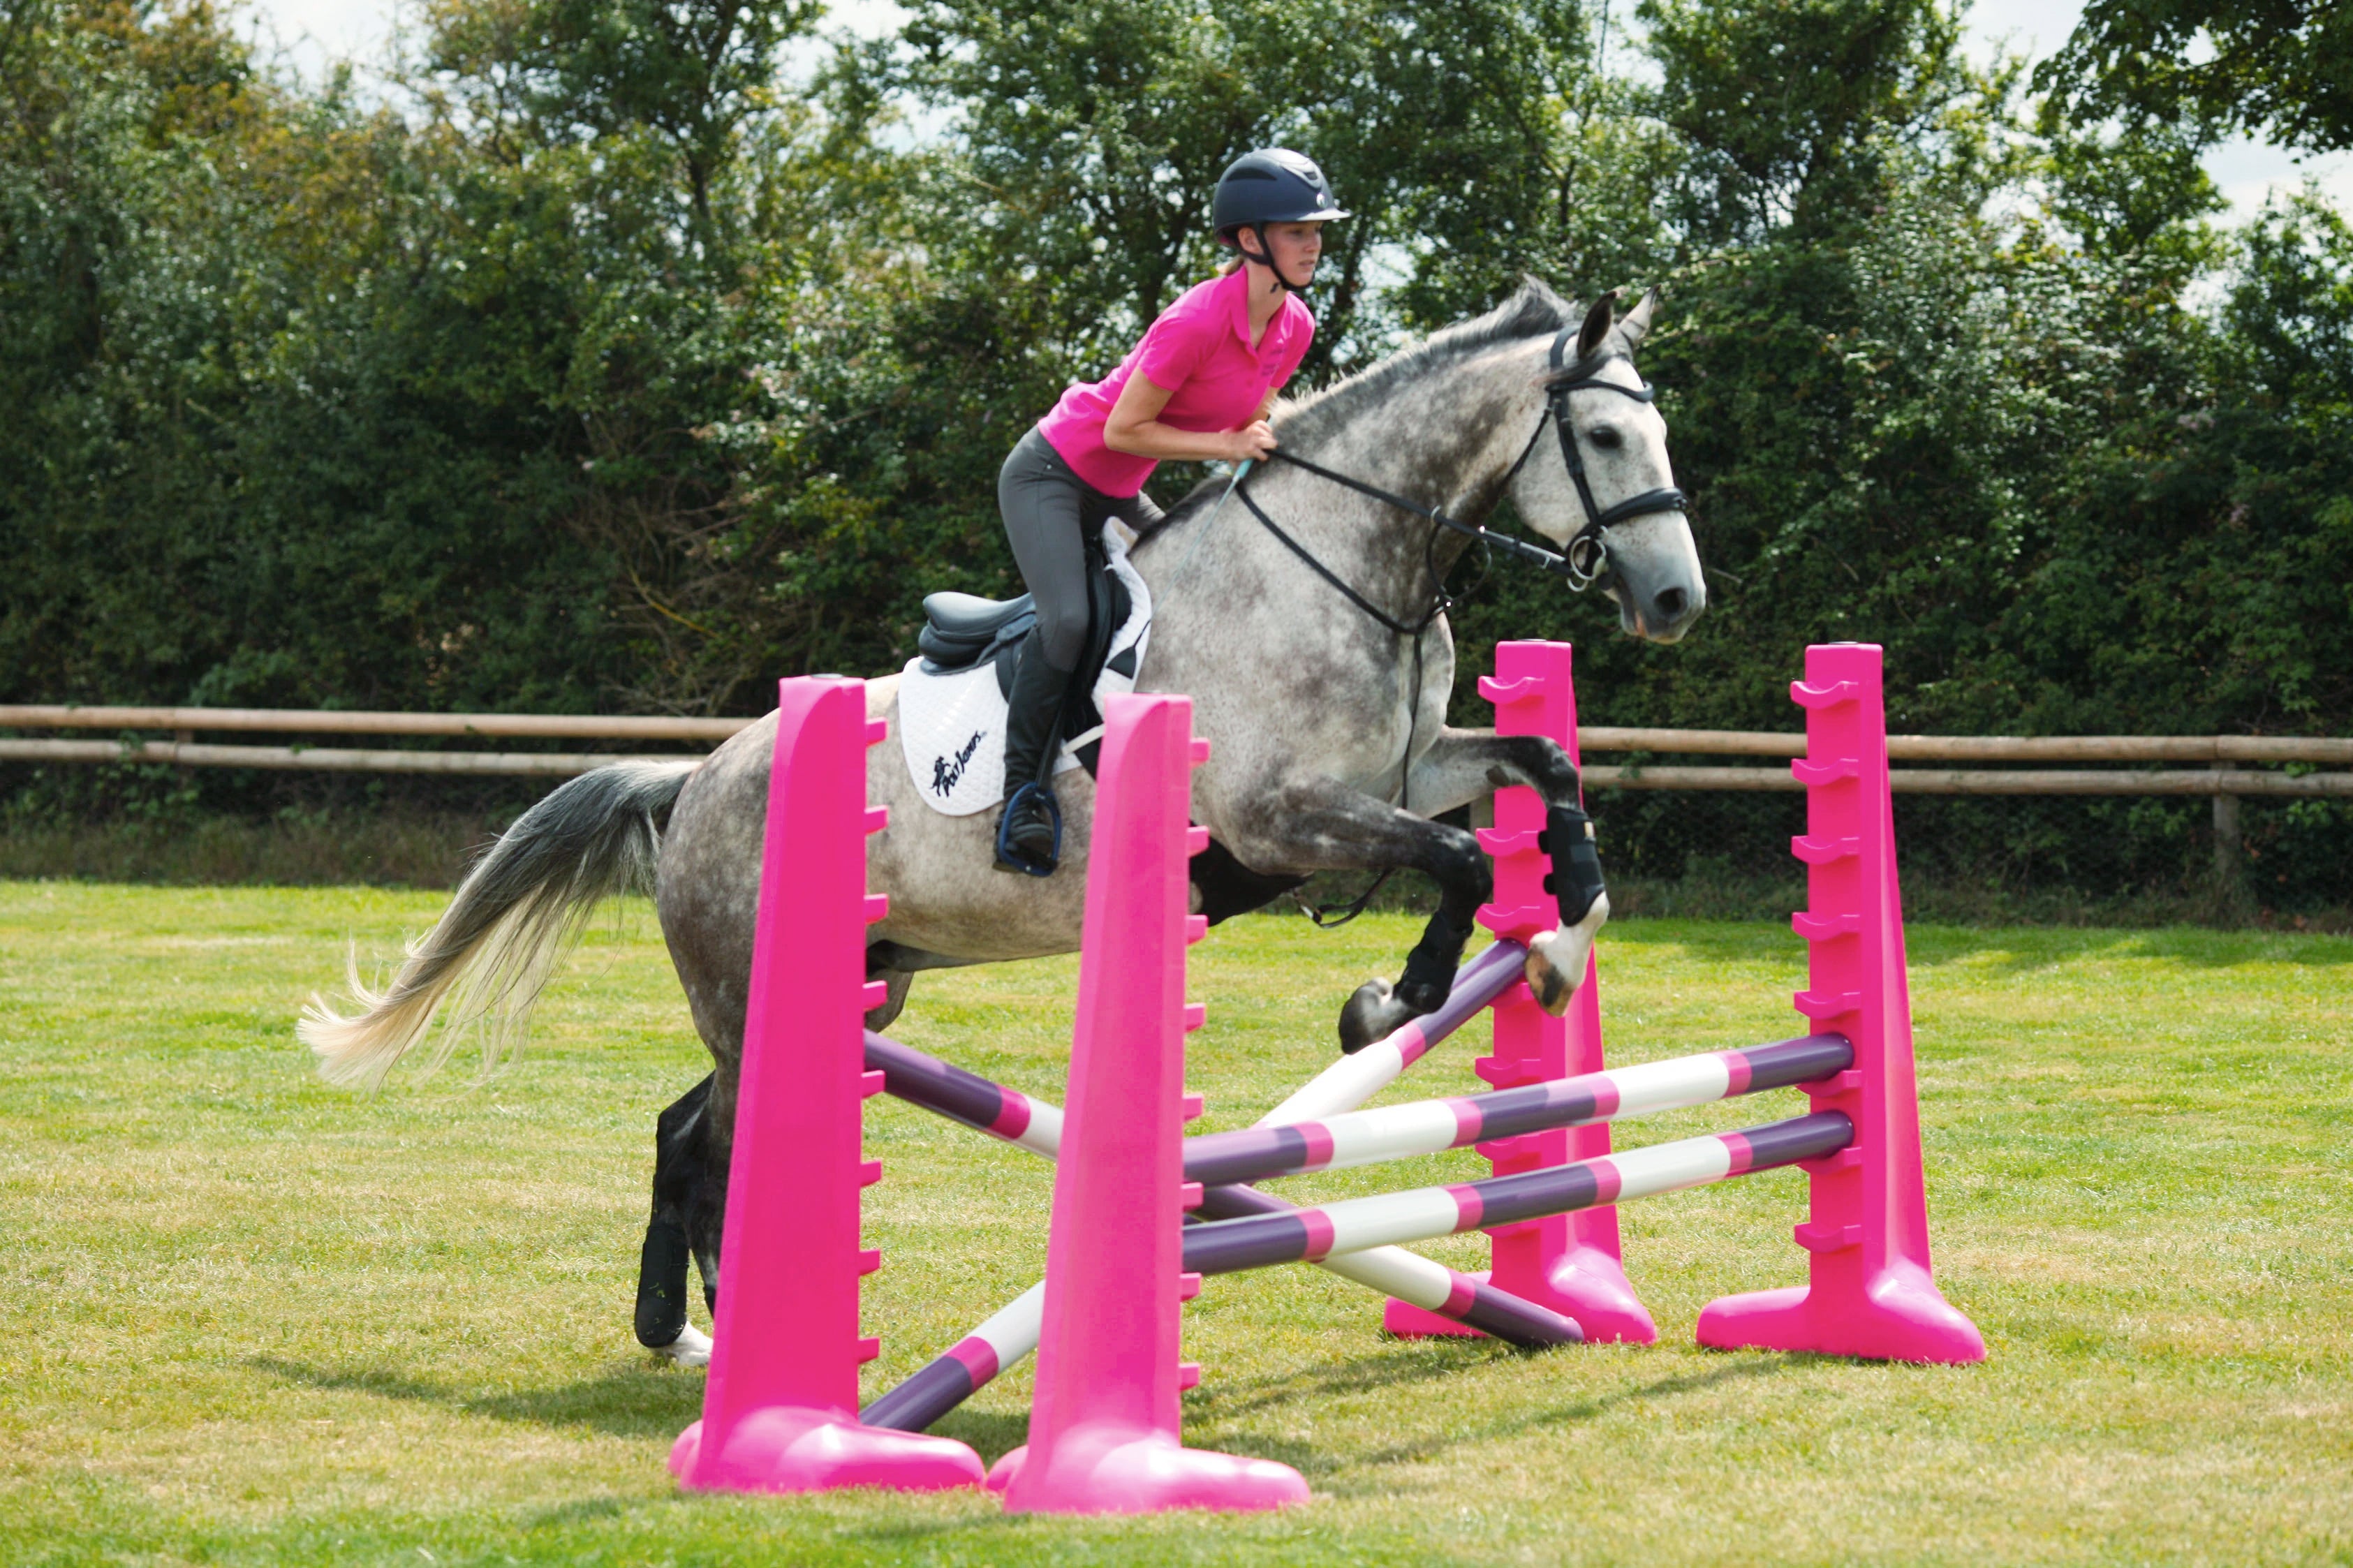 Horse jumping over 2 fences made up of 2 pairs of pink 8 cups with 3 poles. 